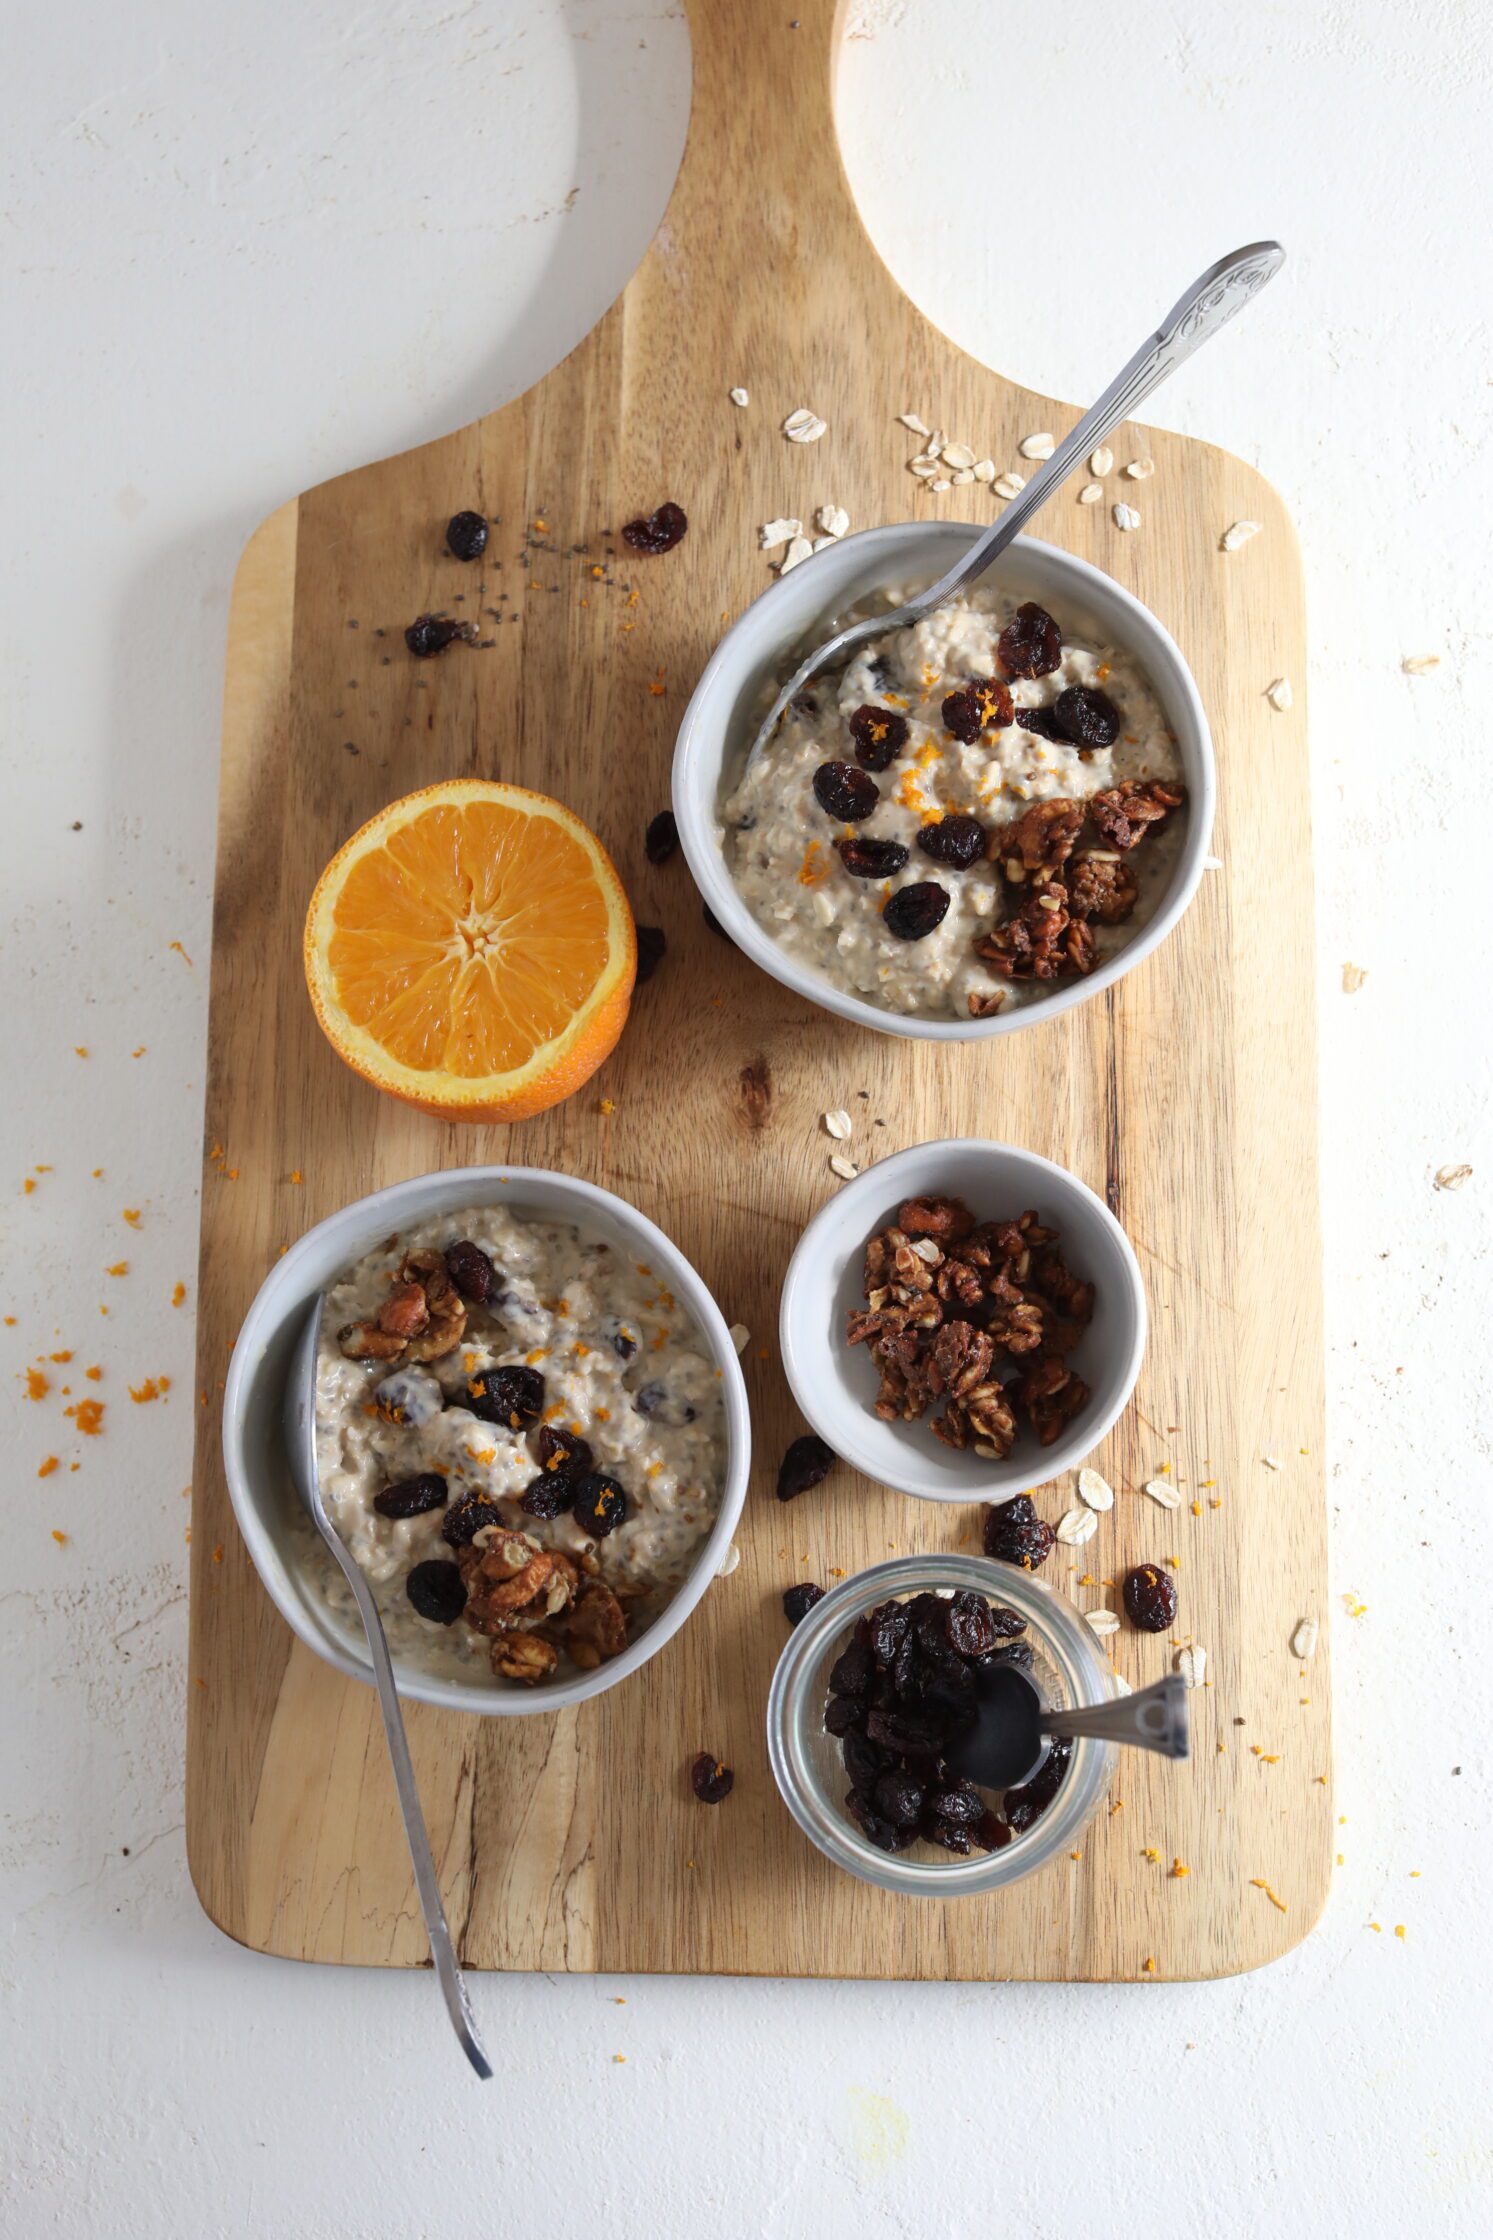 Orange Cranberry Overnight Oats served on wooden board by Flora & Vino